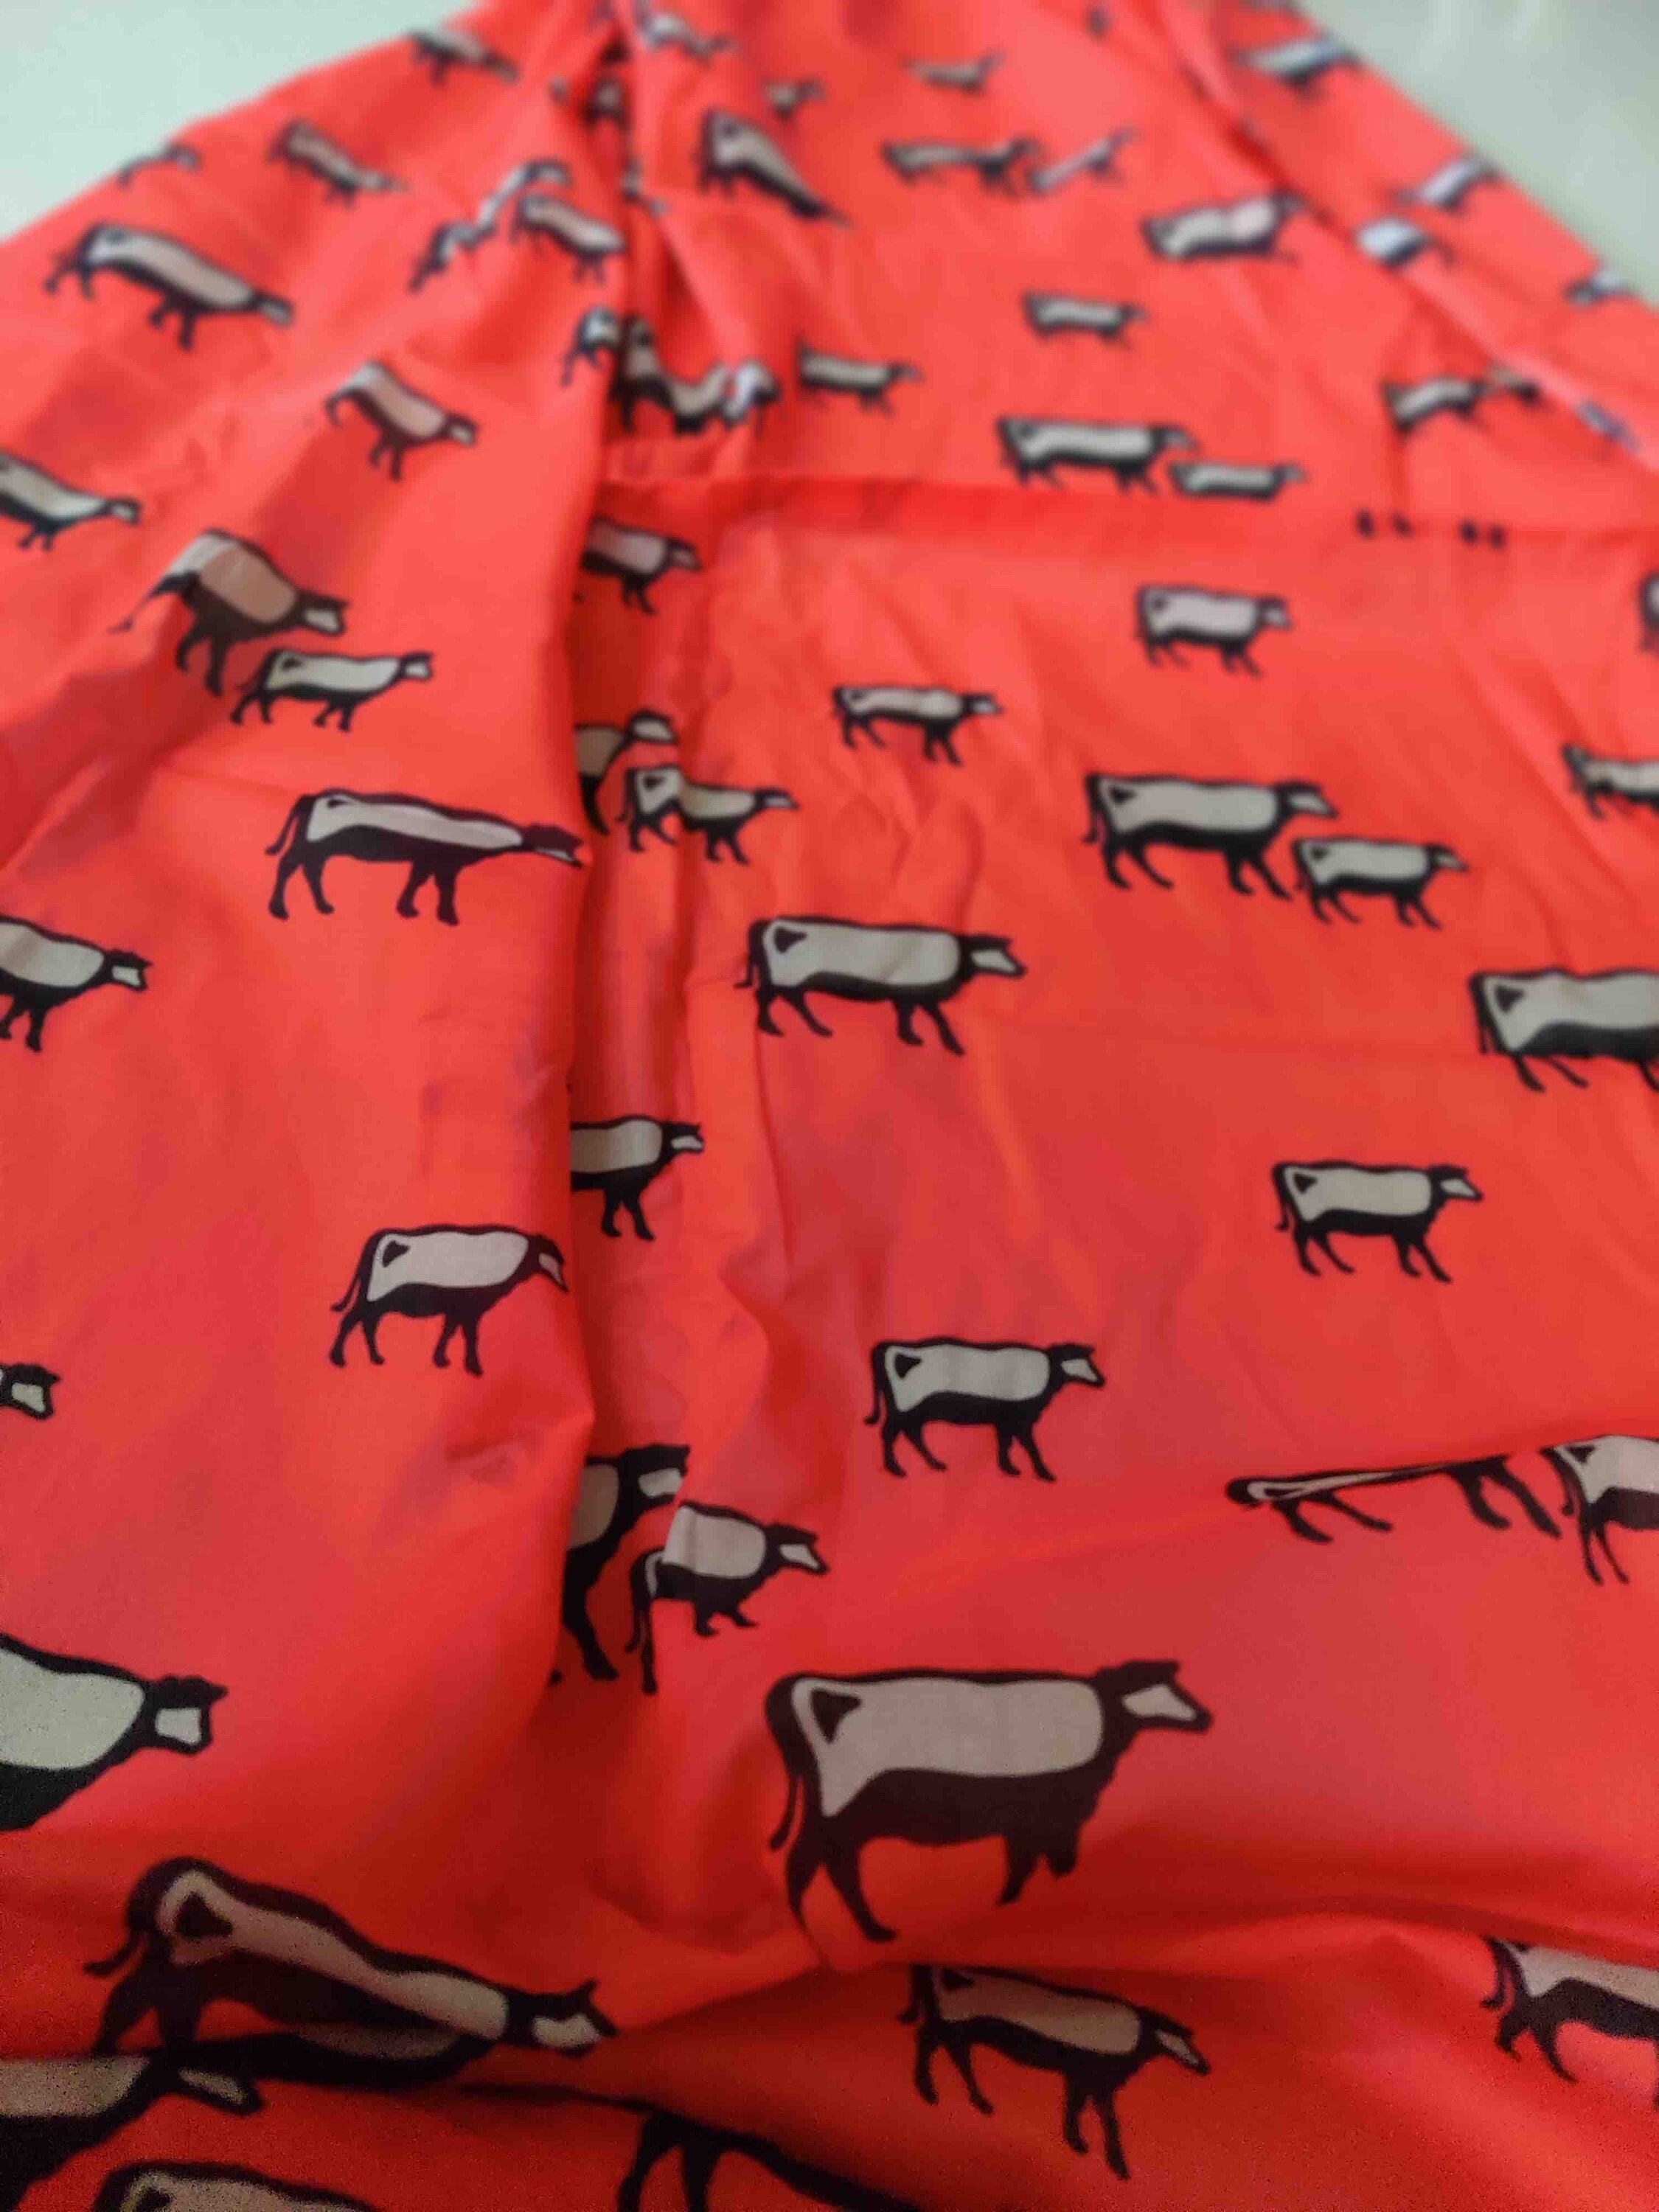 Quirky Red Cow Print Fabric,Red Black Animal Print,Nursery Print Cotton,Boho Home Décor Children's Quilting Sewing Fabric